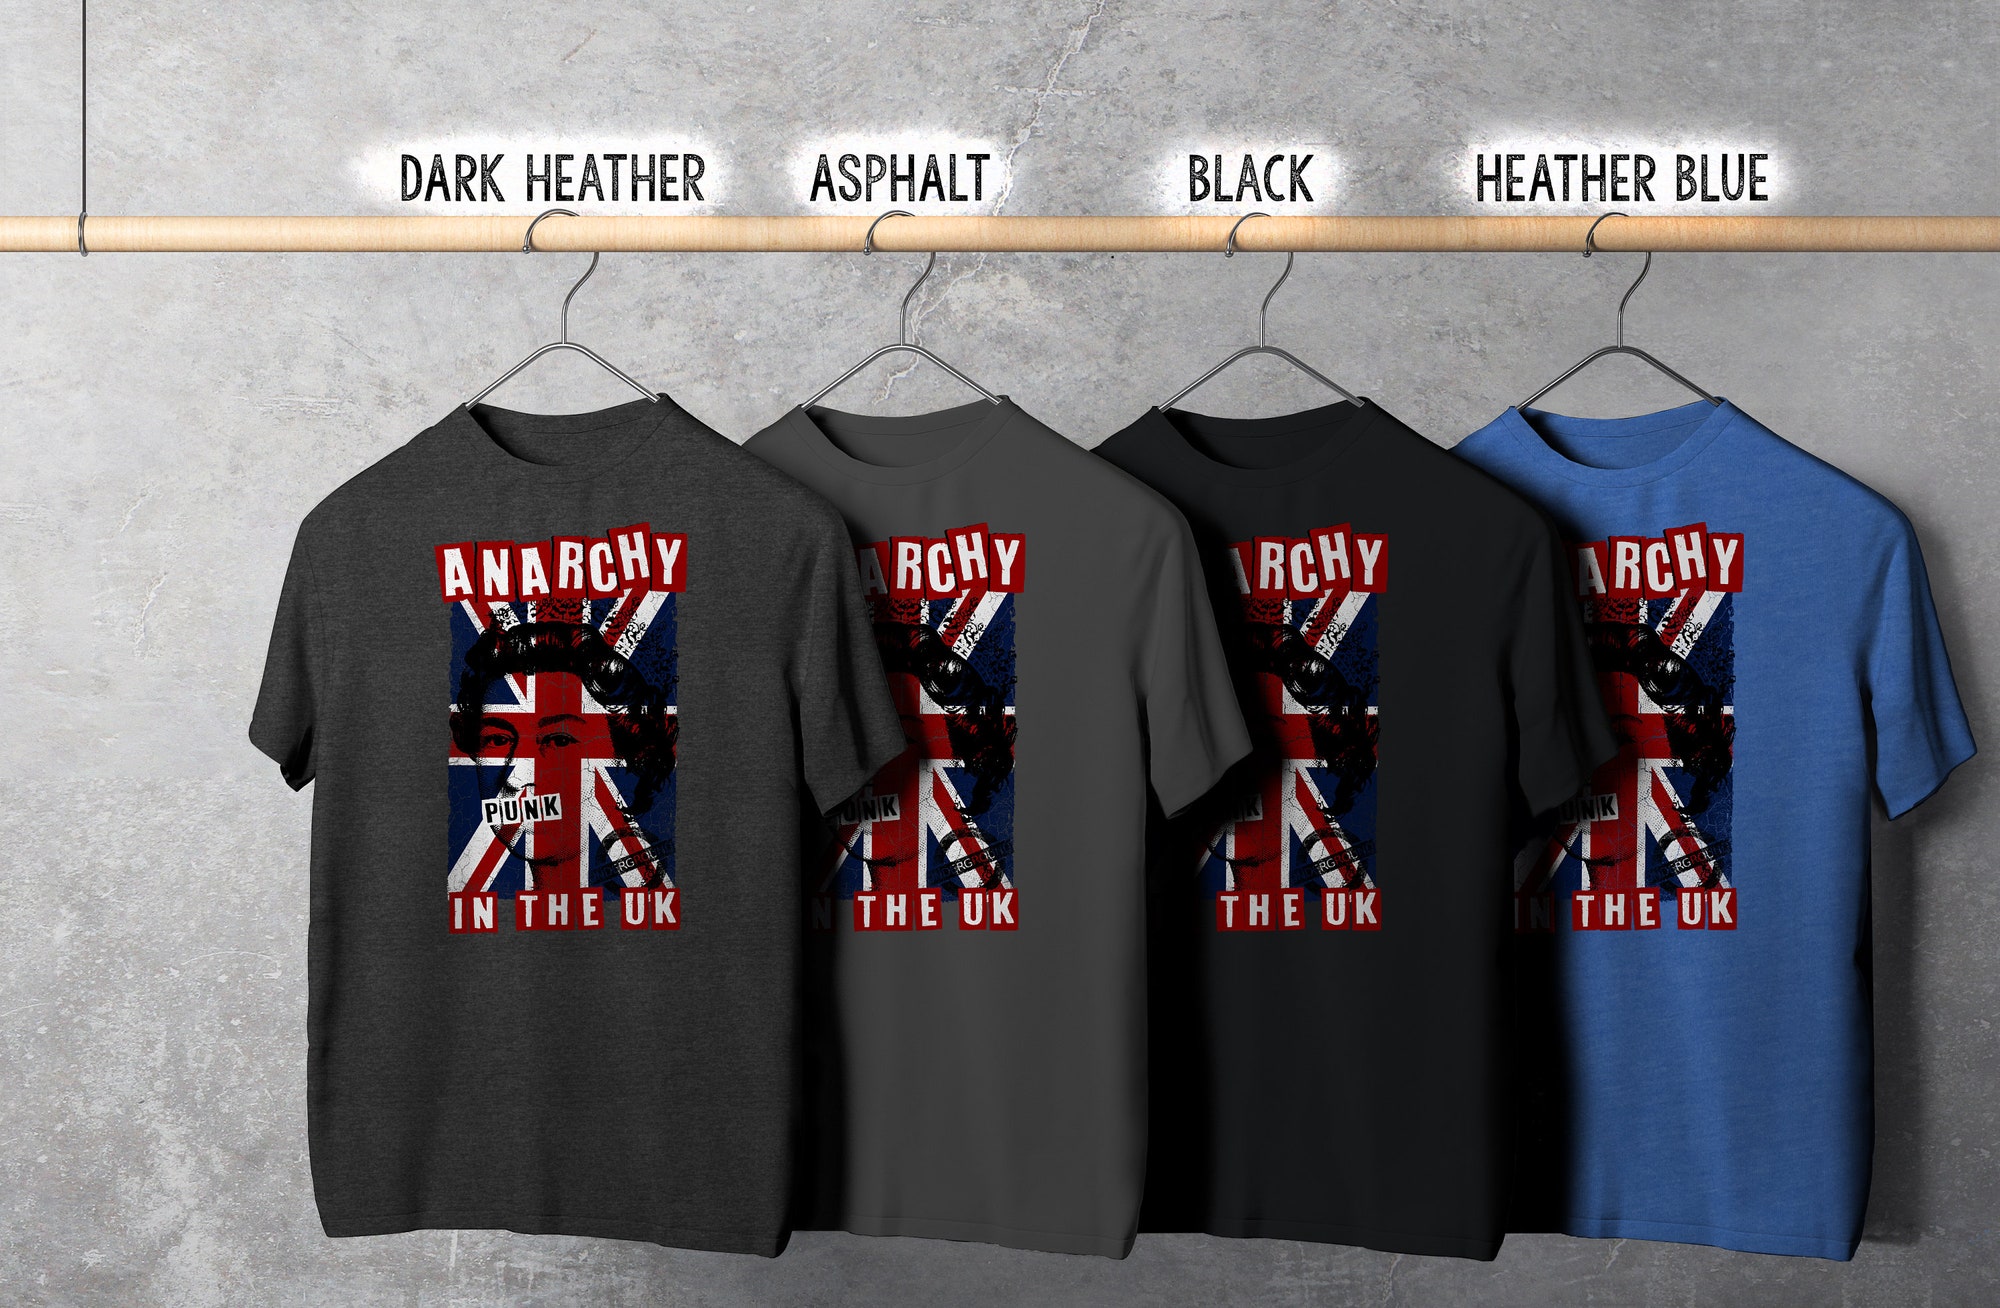 Discover Anarchy In The UK Shirt, British Flag Vintage T-Shirt, Patriotic Tee, Vintage Queen Elizabeth, Punk Rock Band Tee, God Save The Queen Tshirts